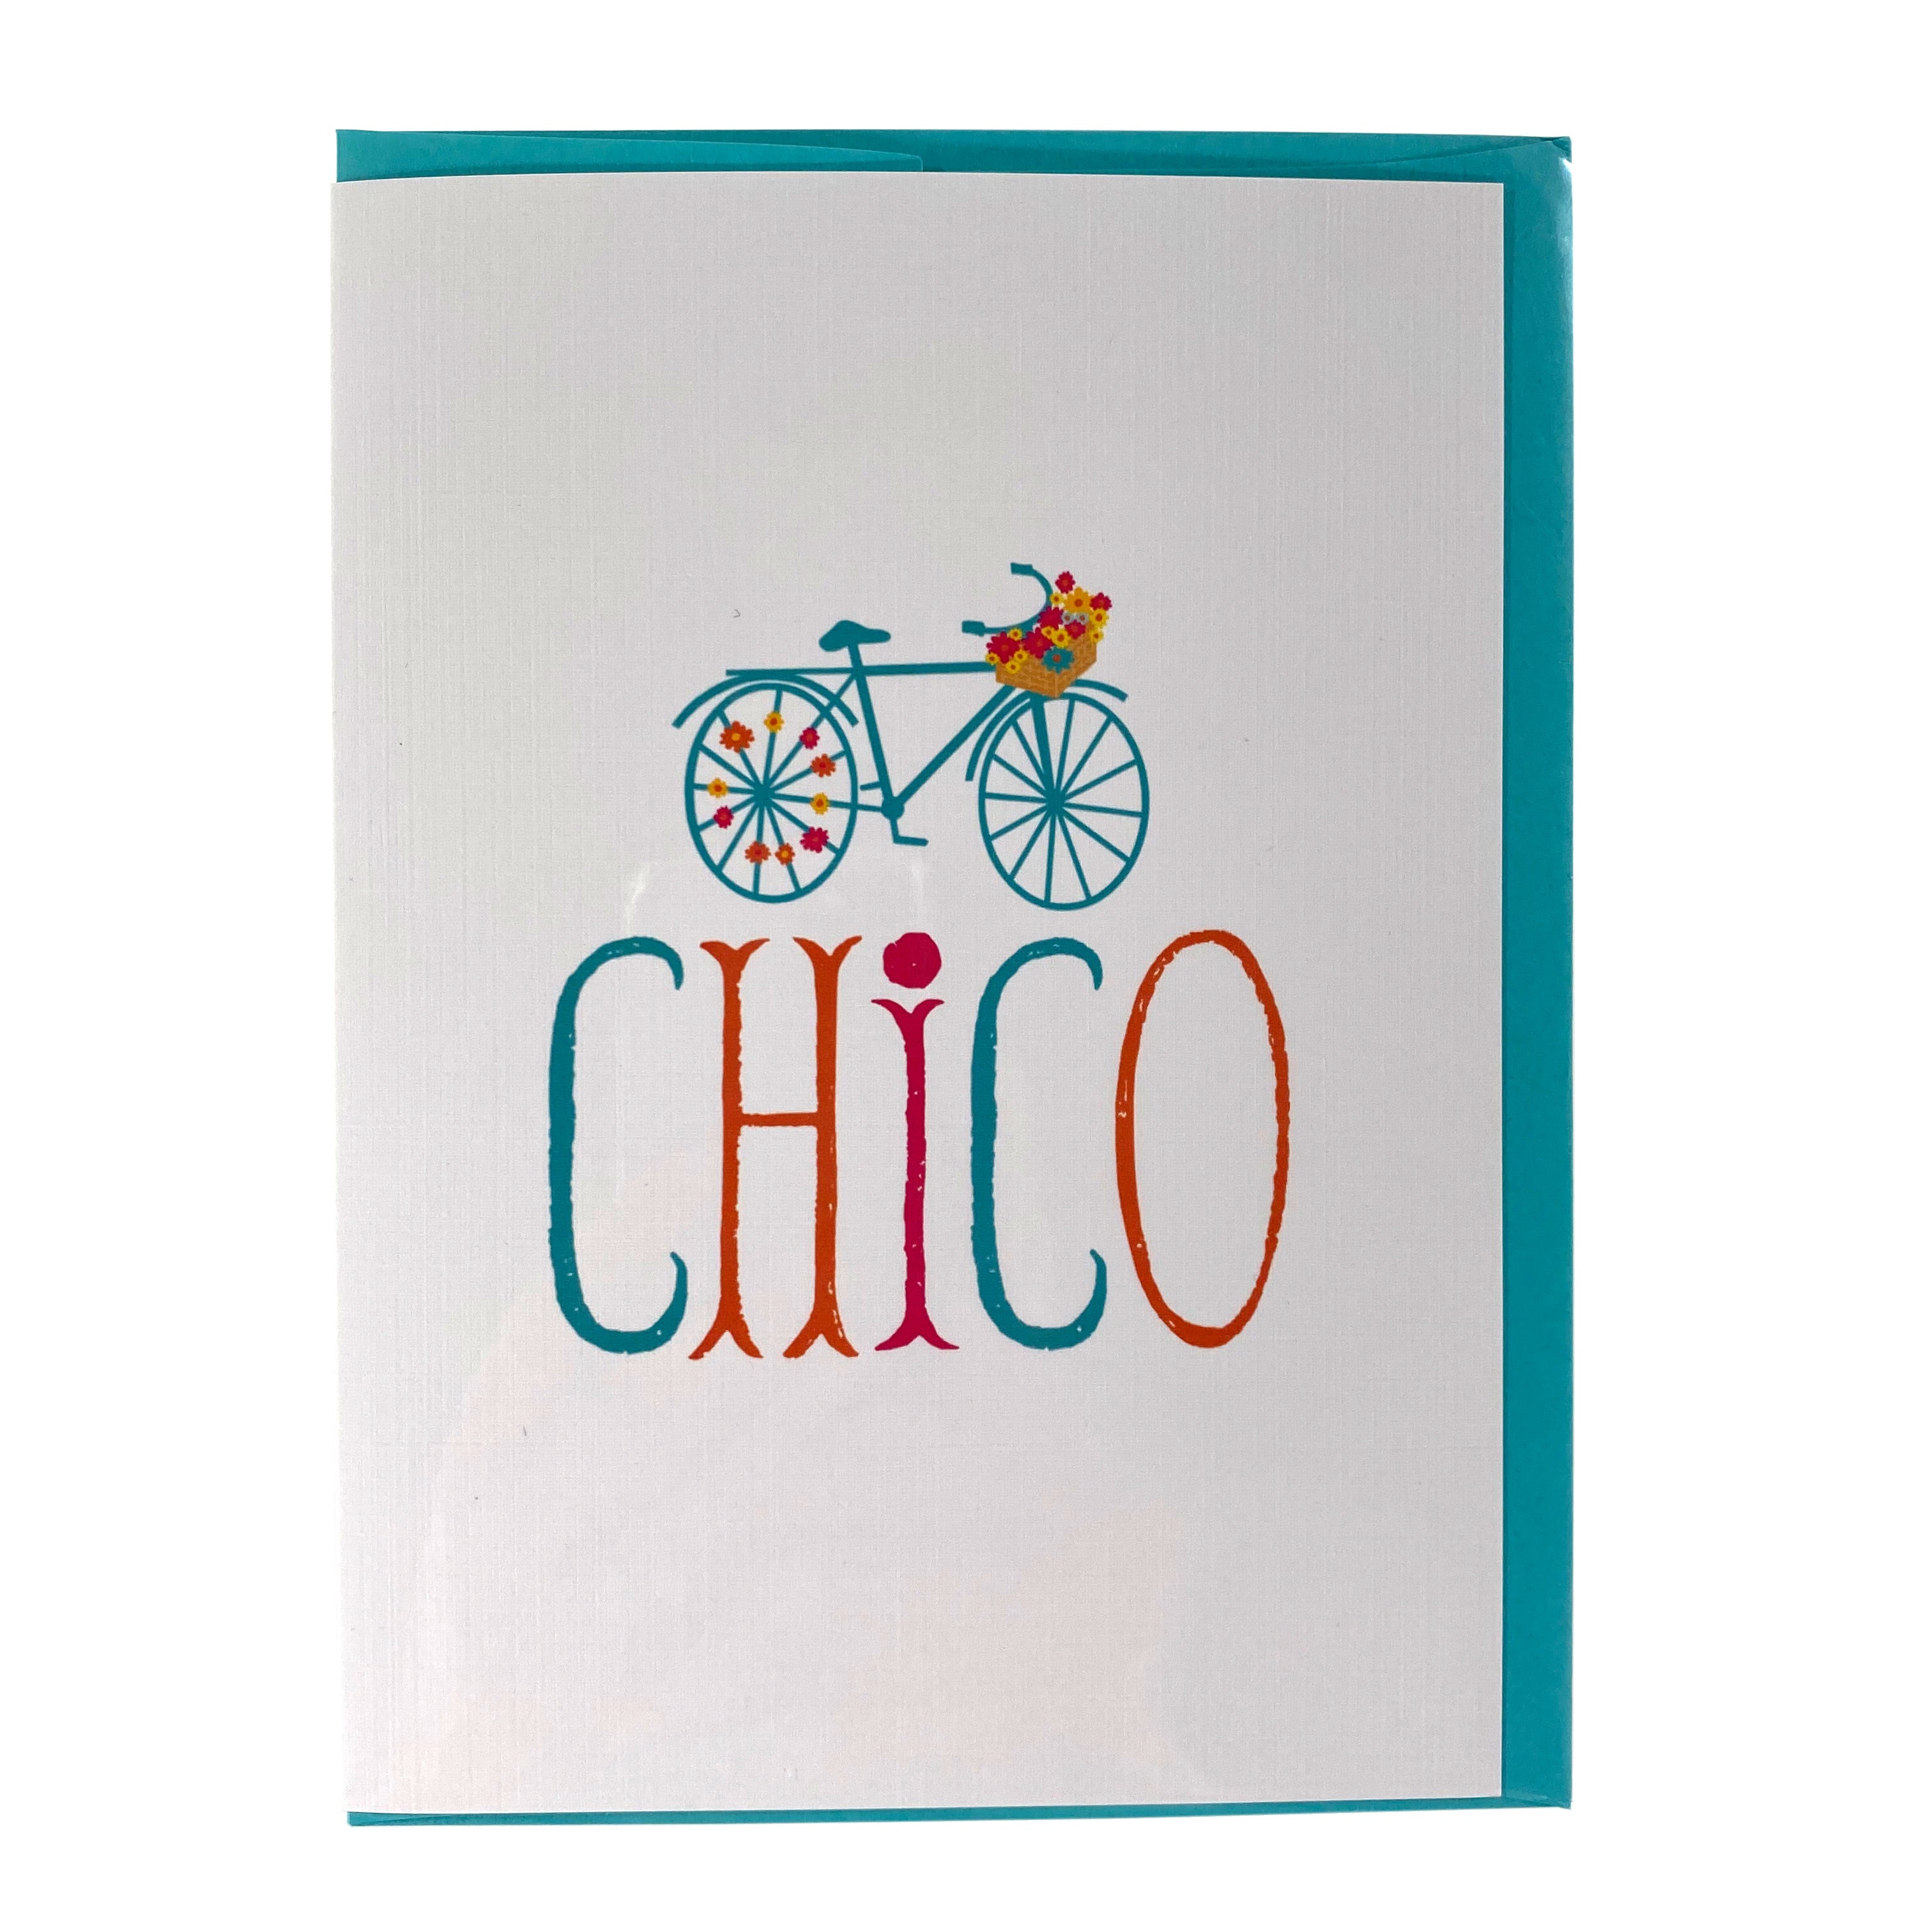 Chico Local Love - Blank Greeting Card    